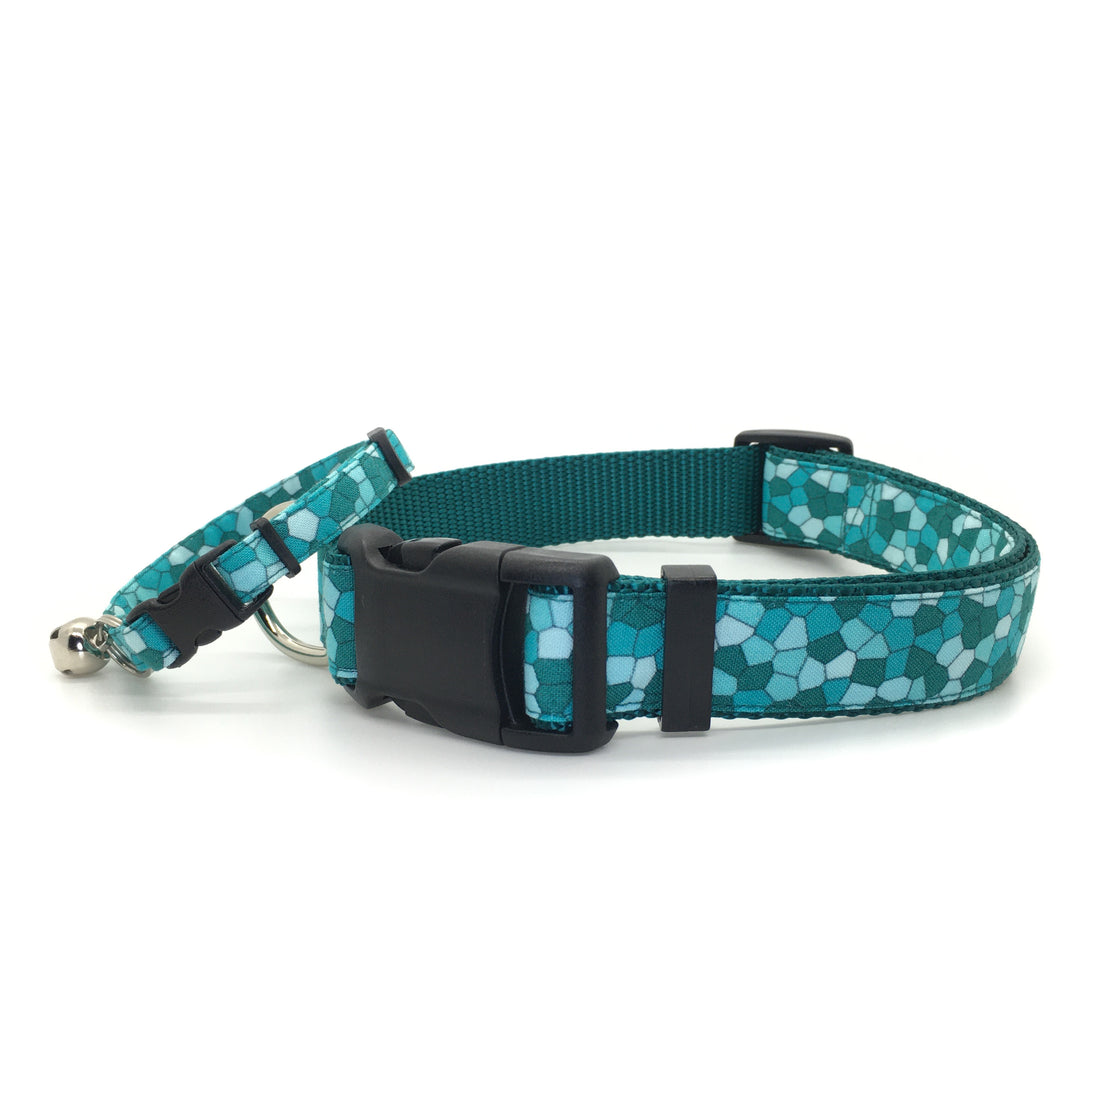 Persnickety Pets: Dragon scales cat and dog collars